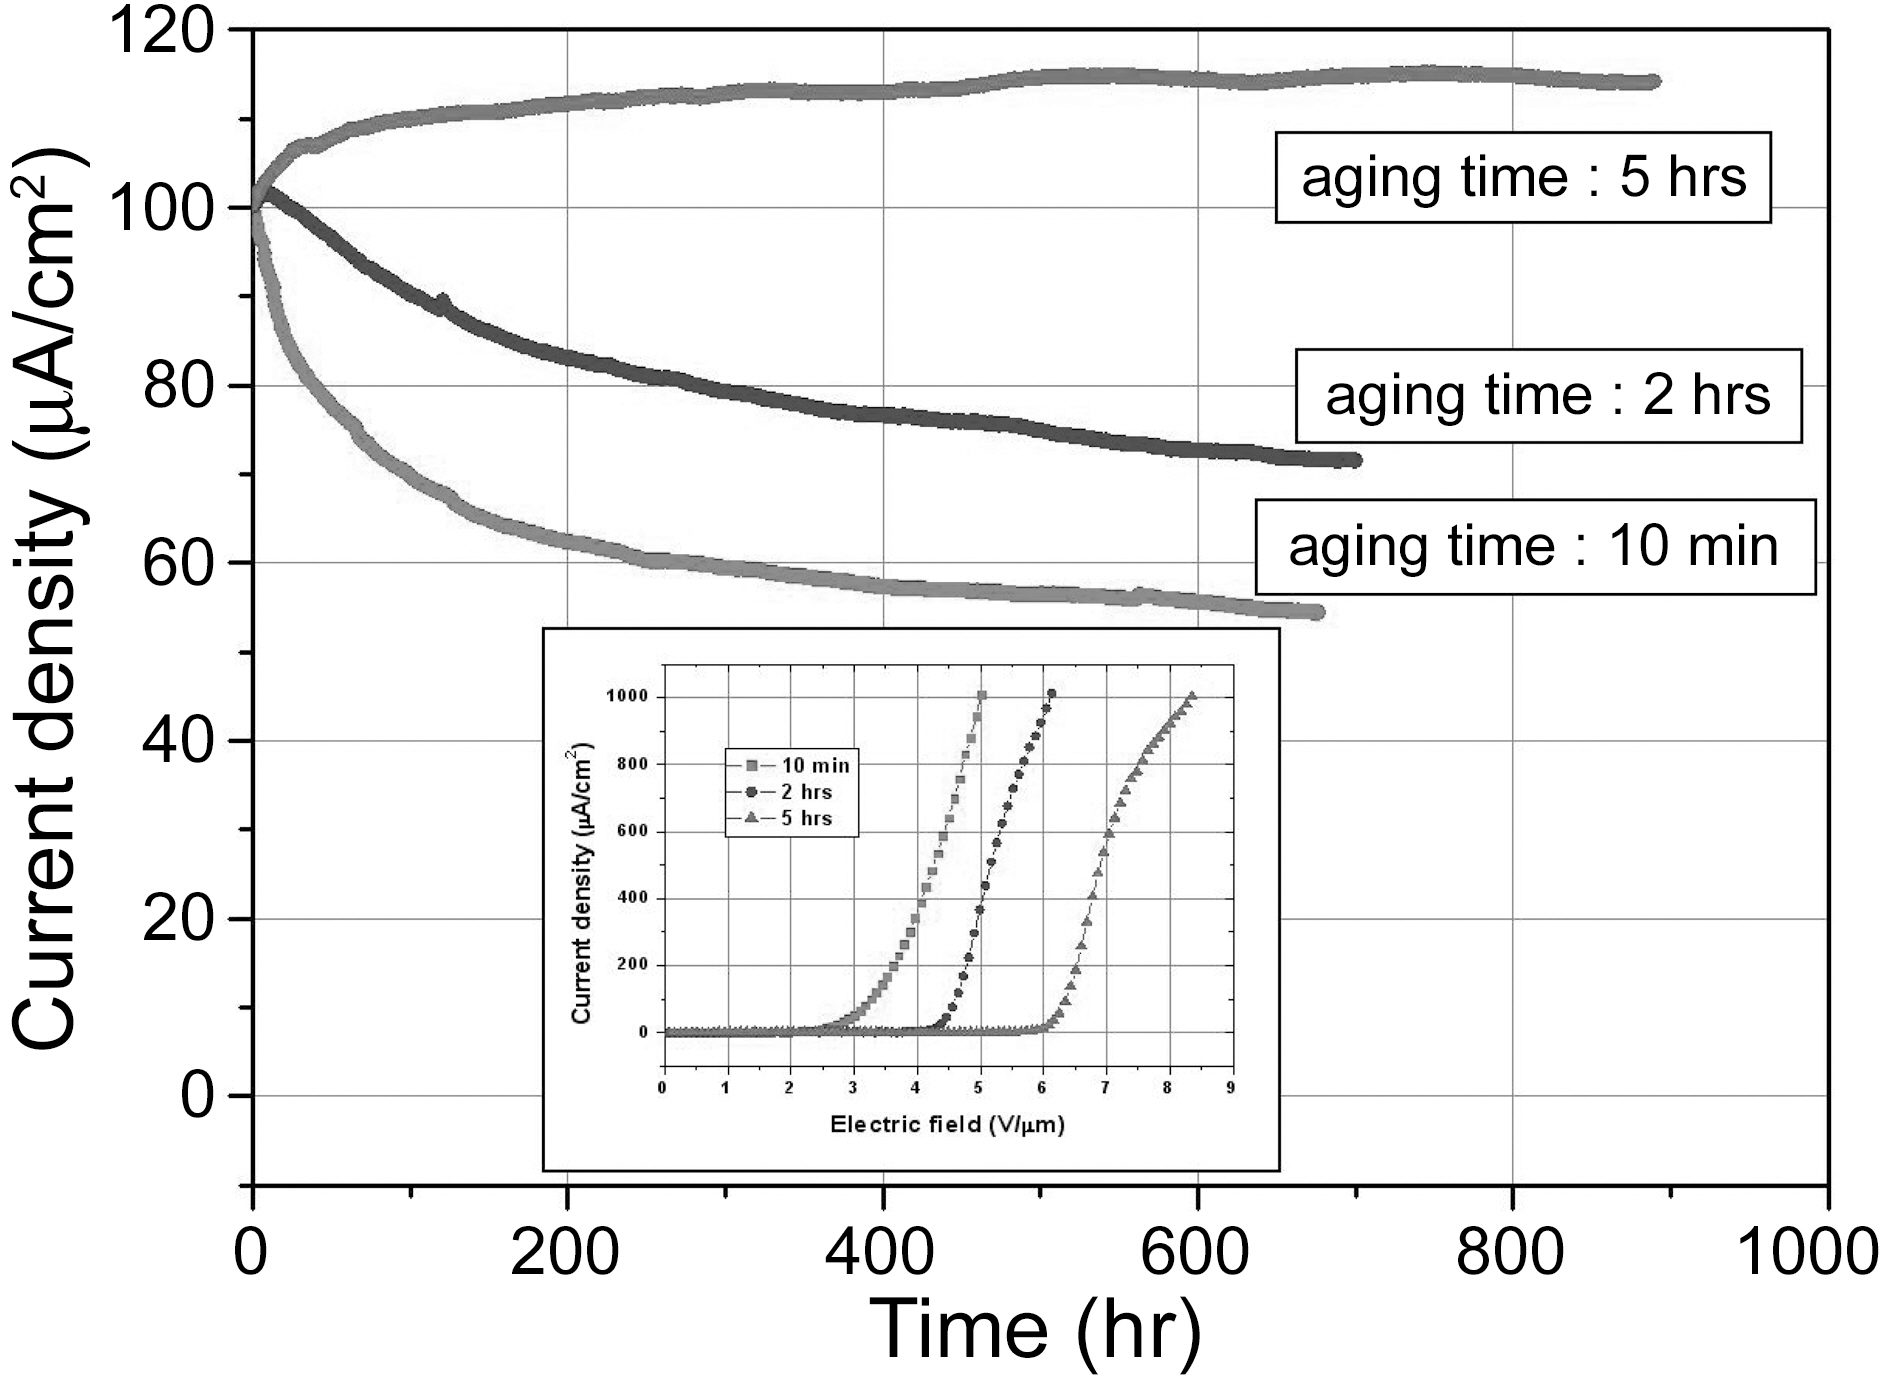 Emission current density vs. time characteristics of CNT paste emitters with various aging times (10 min 2 hrs and 5 hrs). Inset shows the current density vs. electric field (I-E) curves of the emitters with various aging times.